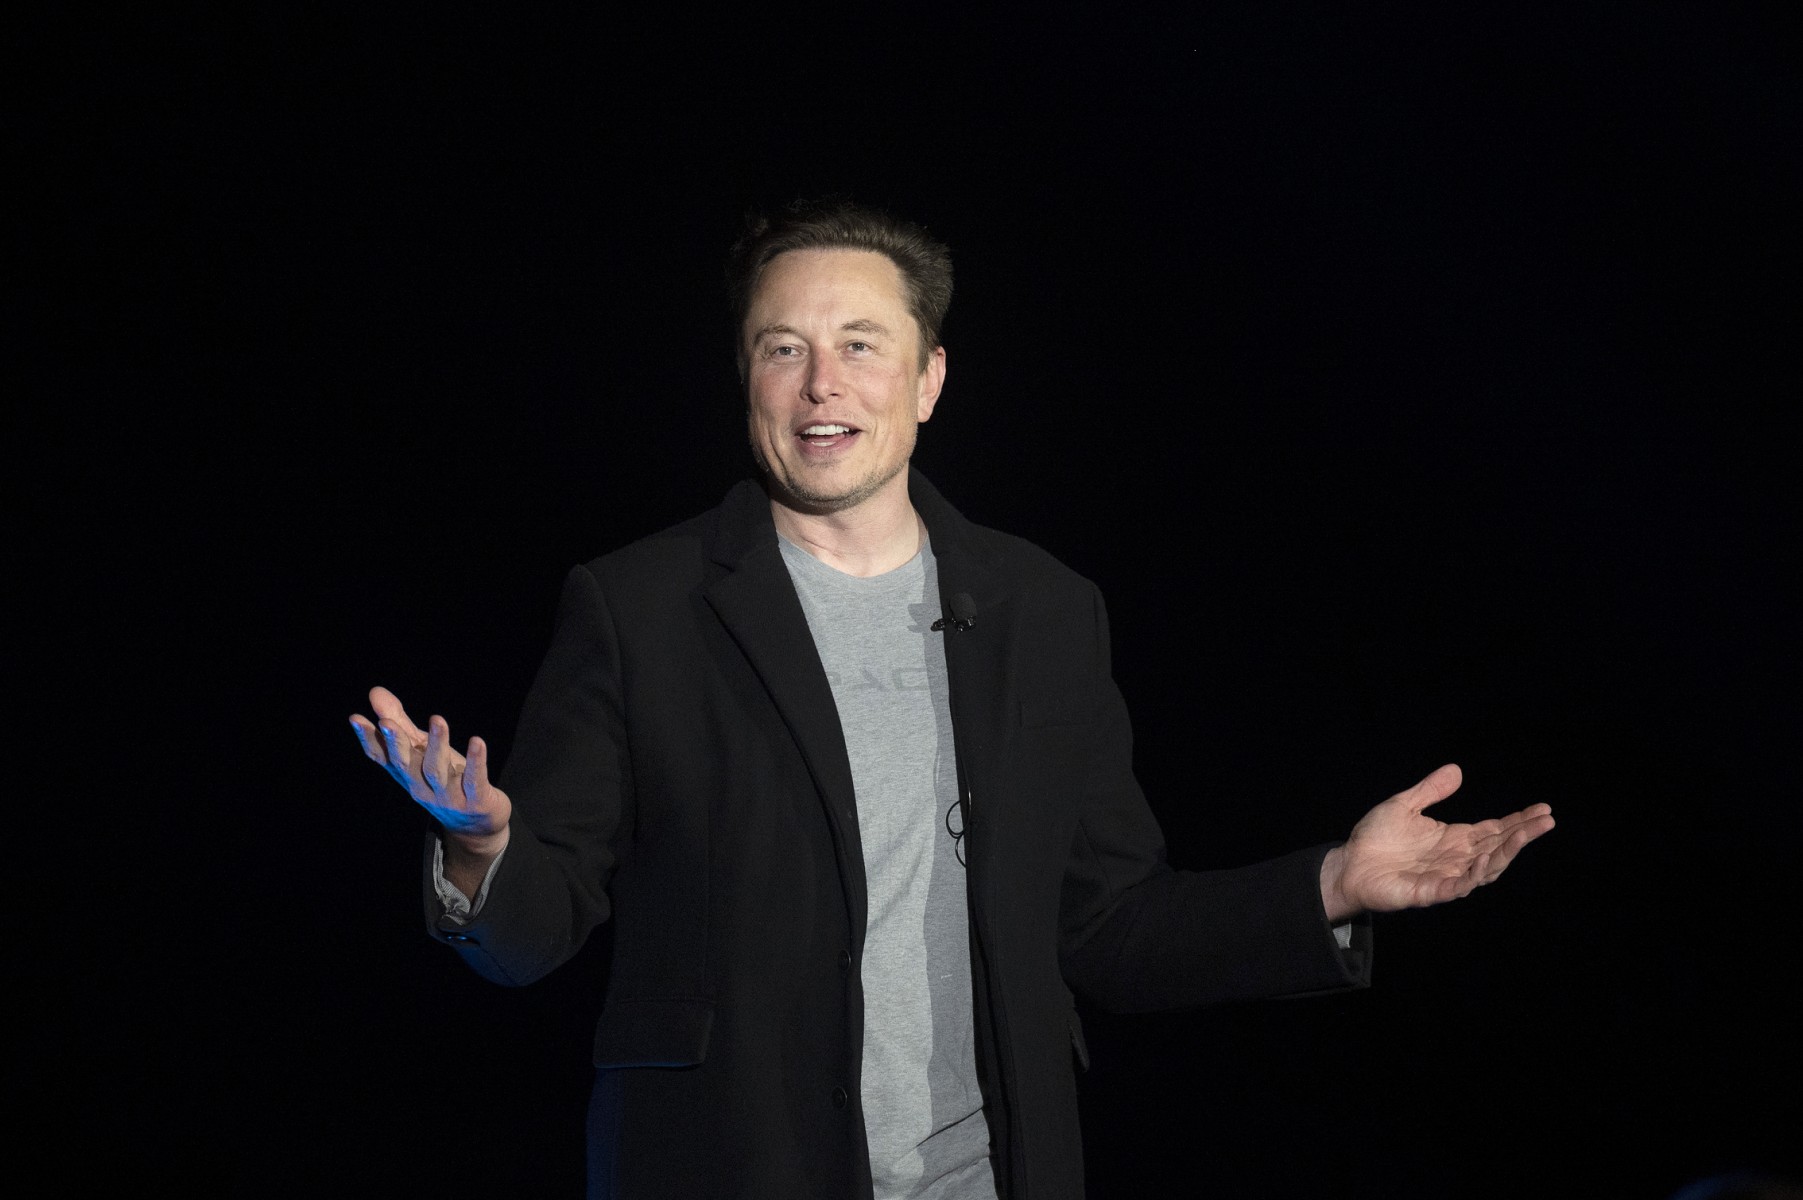 Elon Musk's SpaceX offers satellite internet to Iran